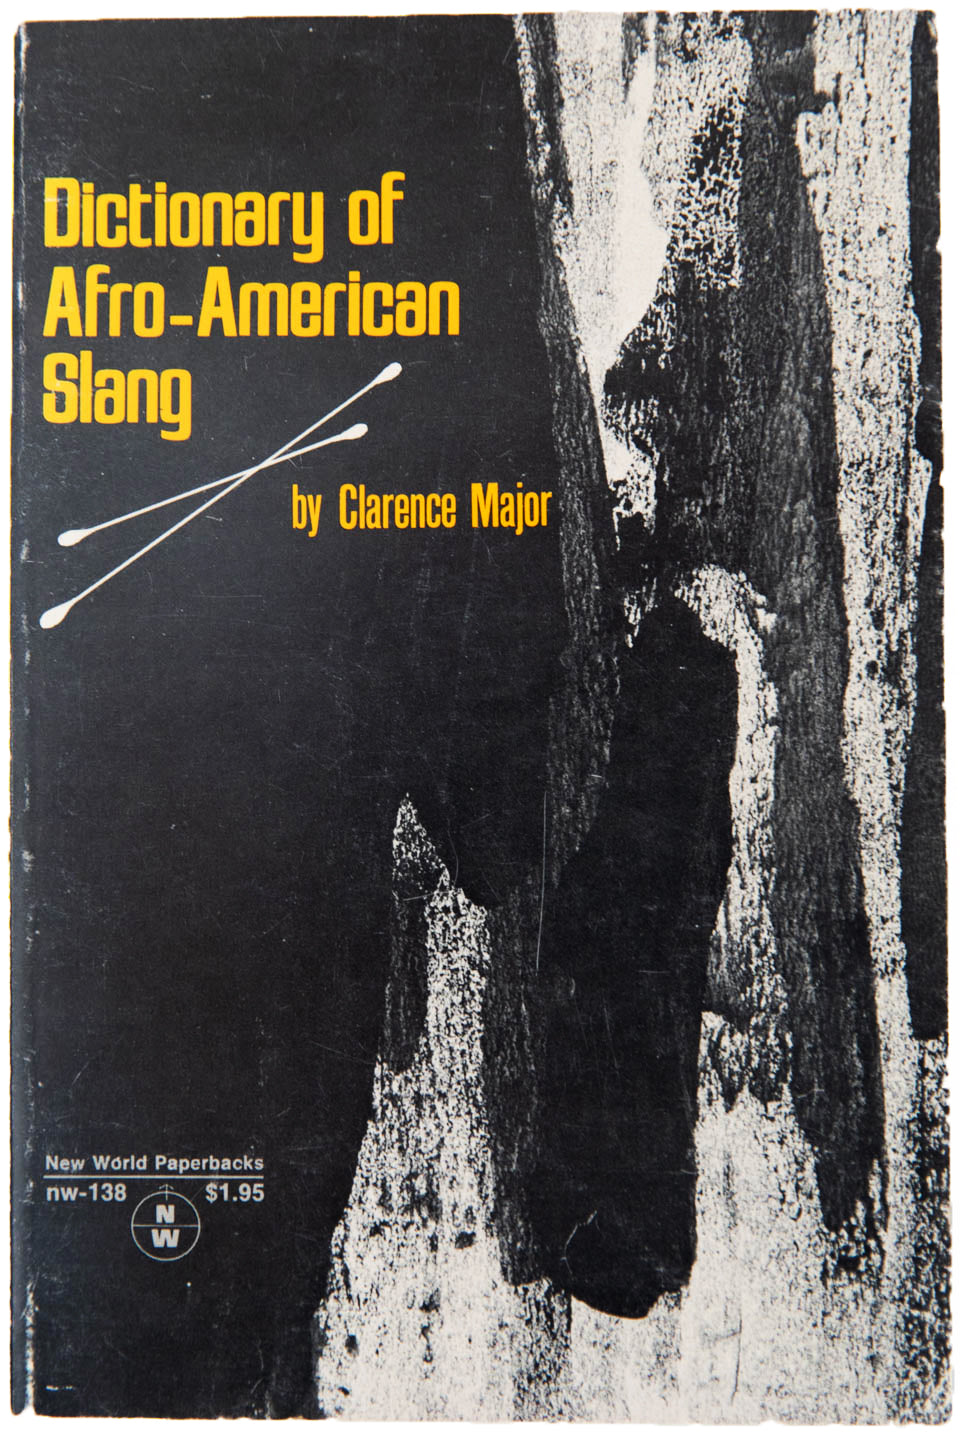 DICTIONARY OF AFRO-AMERICAN SLANG